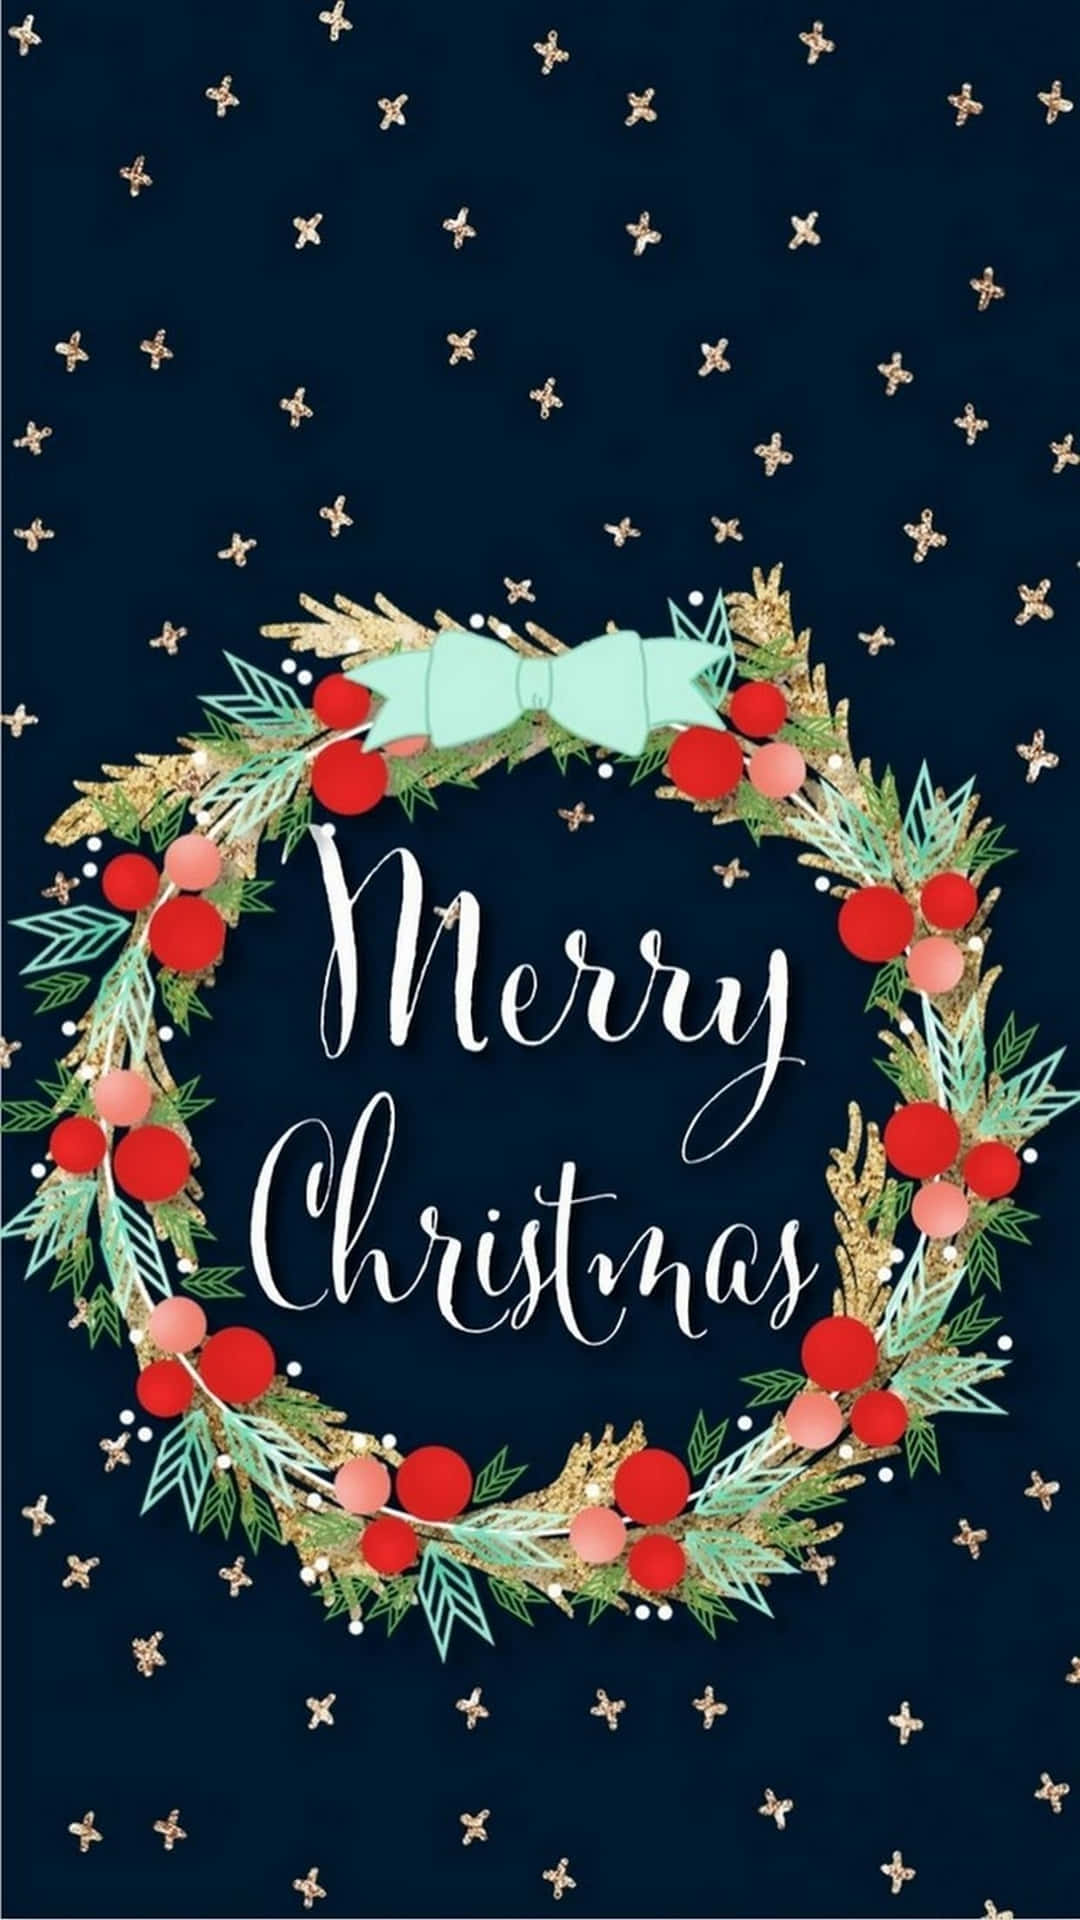 Merry Christmas Card With A Wreath And Stars Background